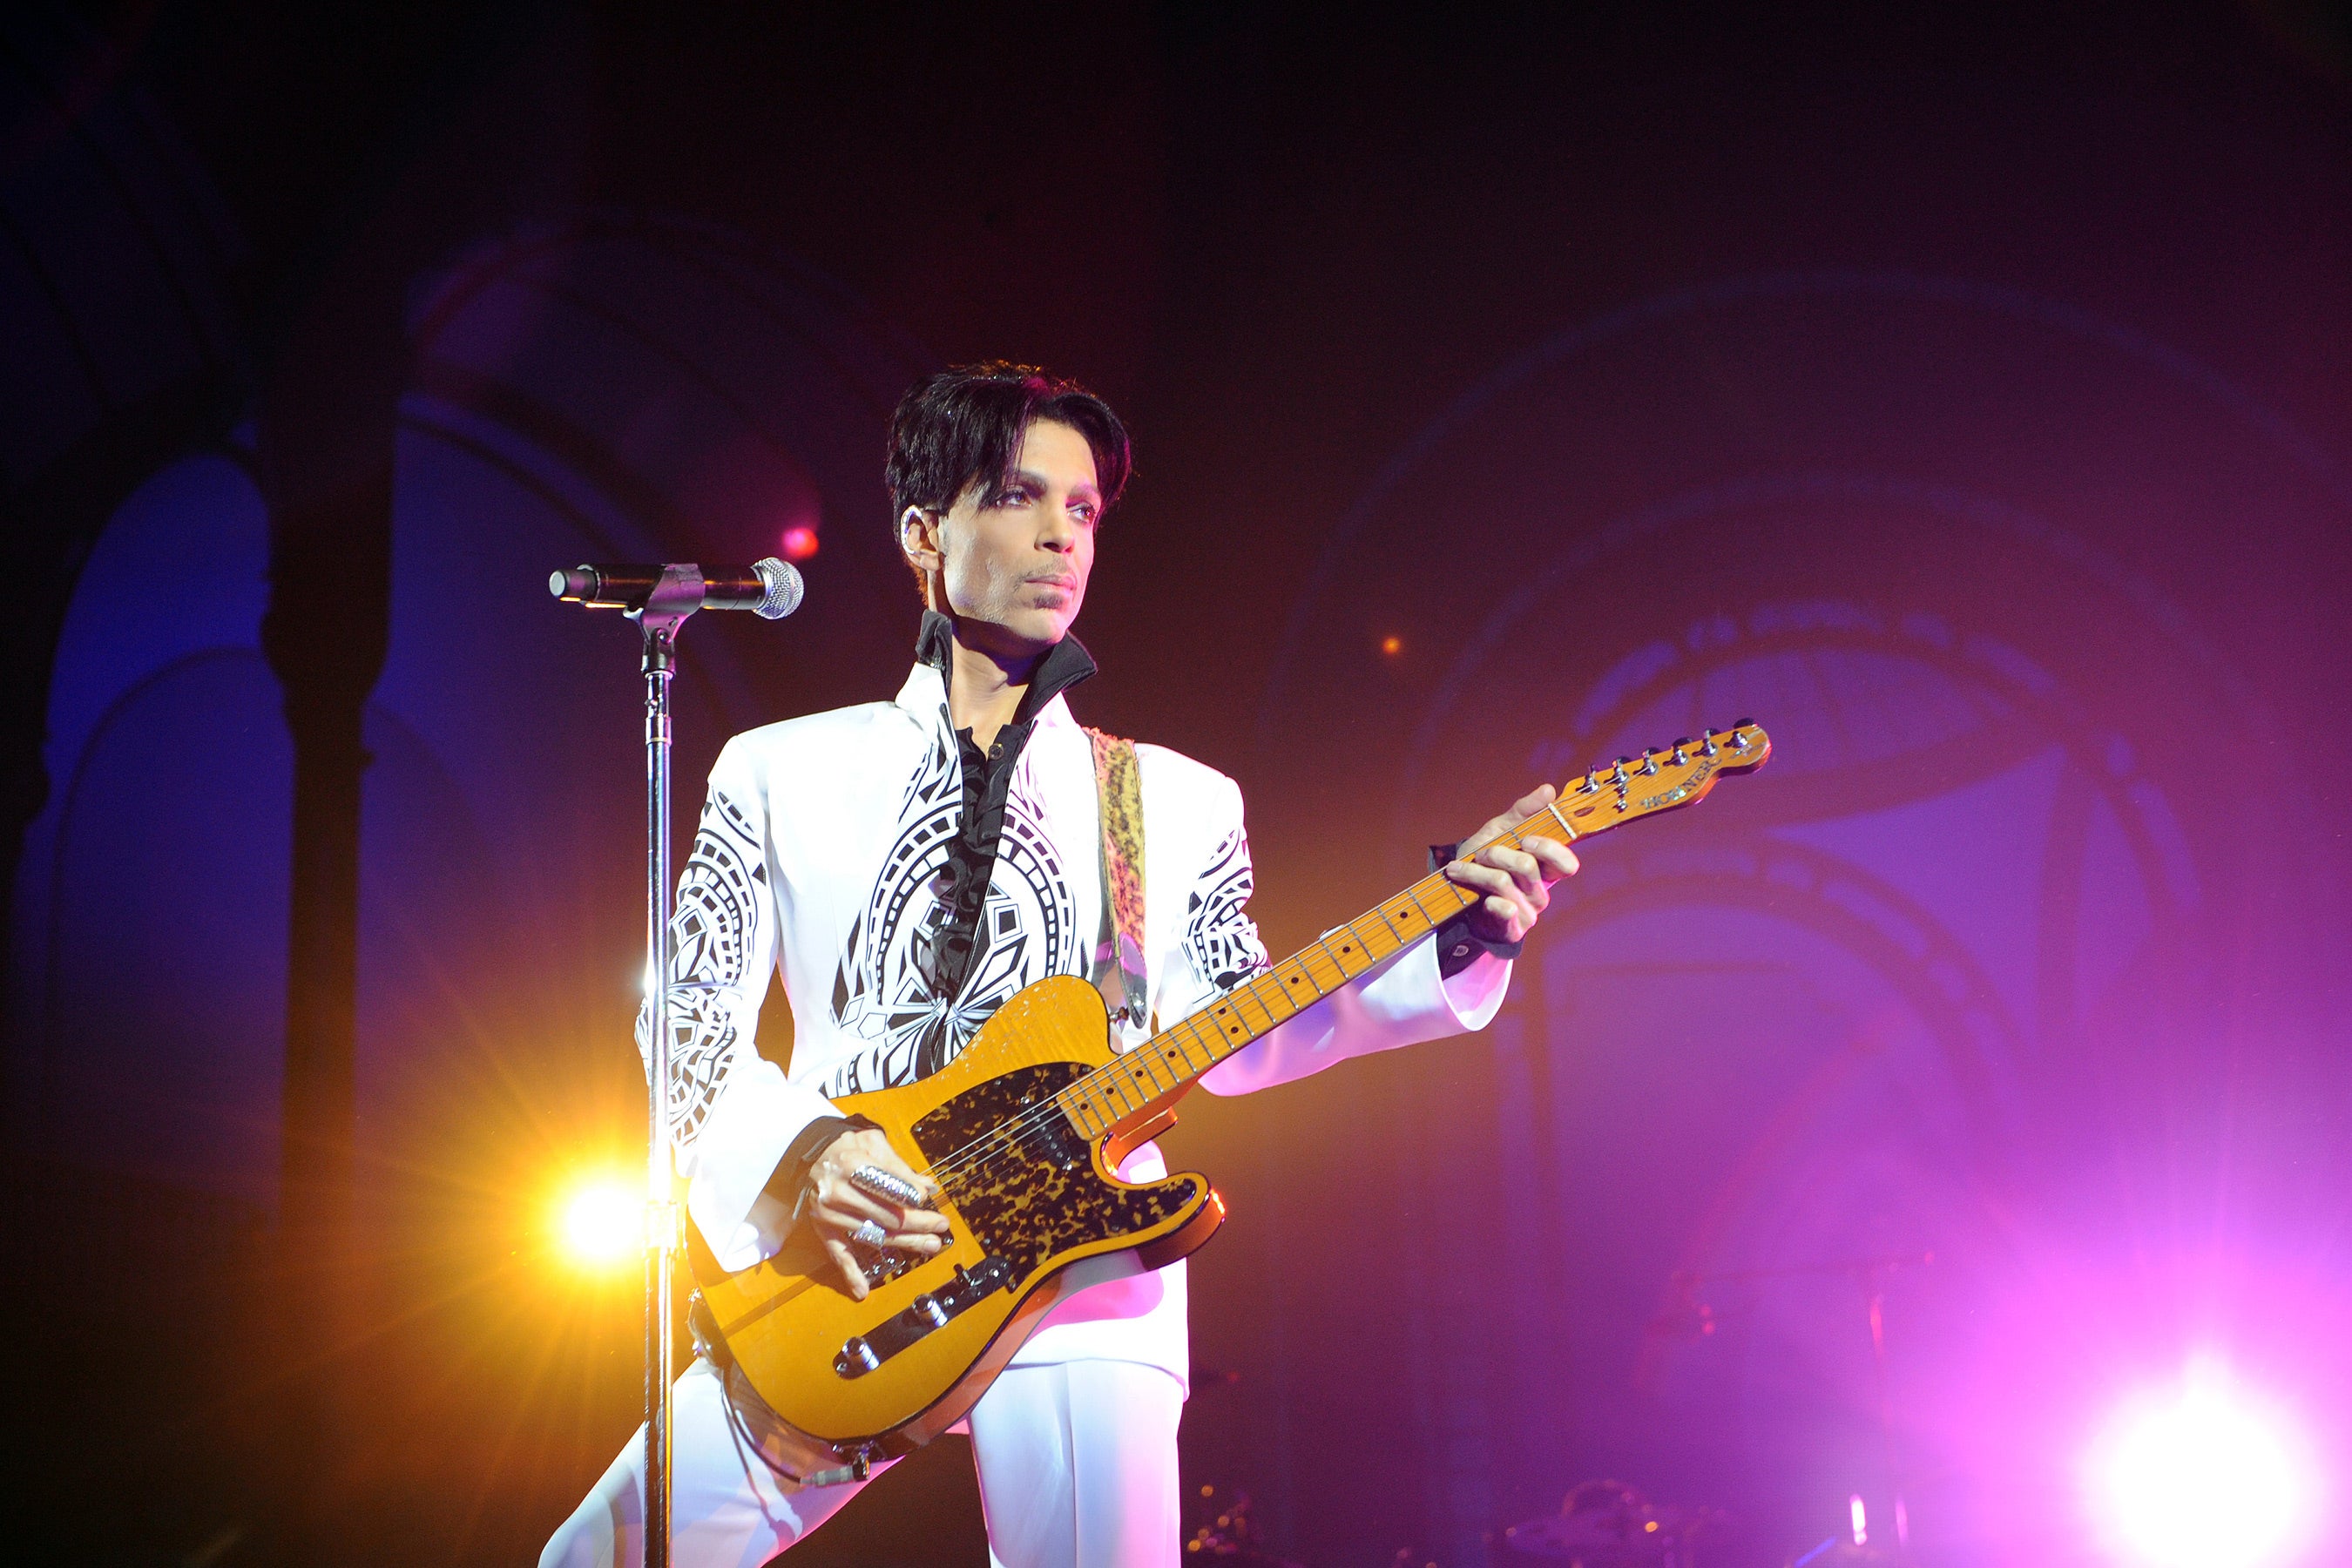 New Report Finds Prince Had 'Exceedingly High' Amount of Fentanyl In His Body When He Died
